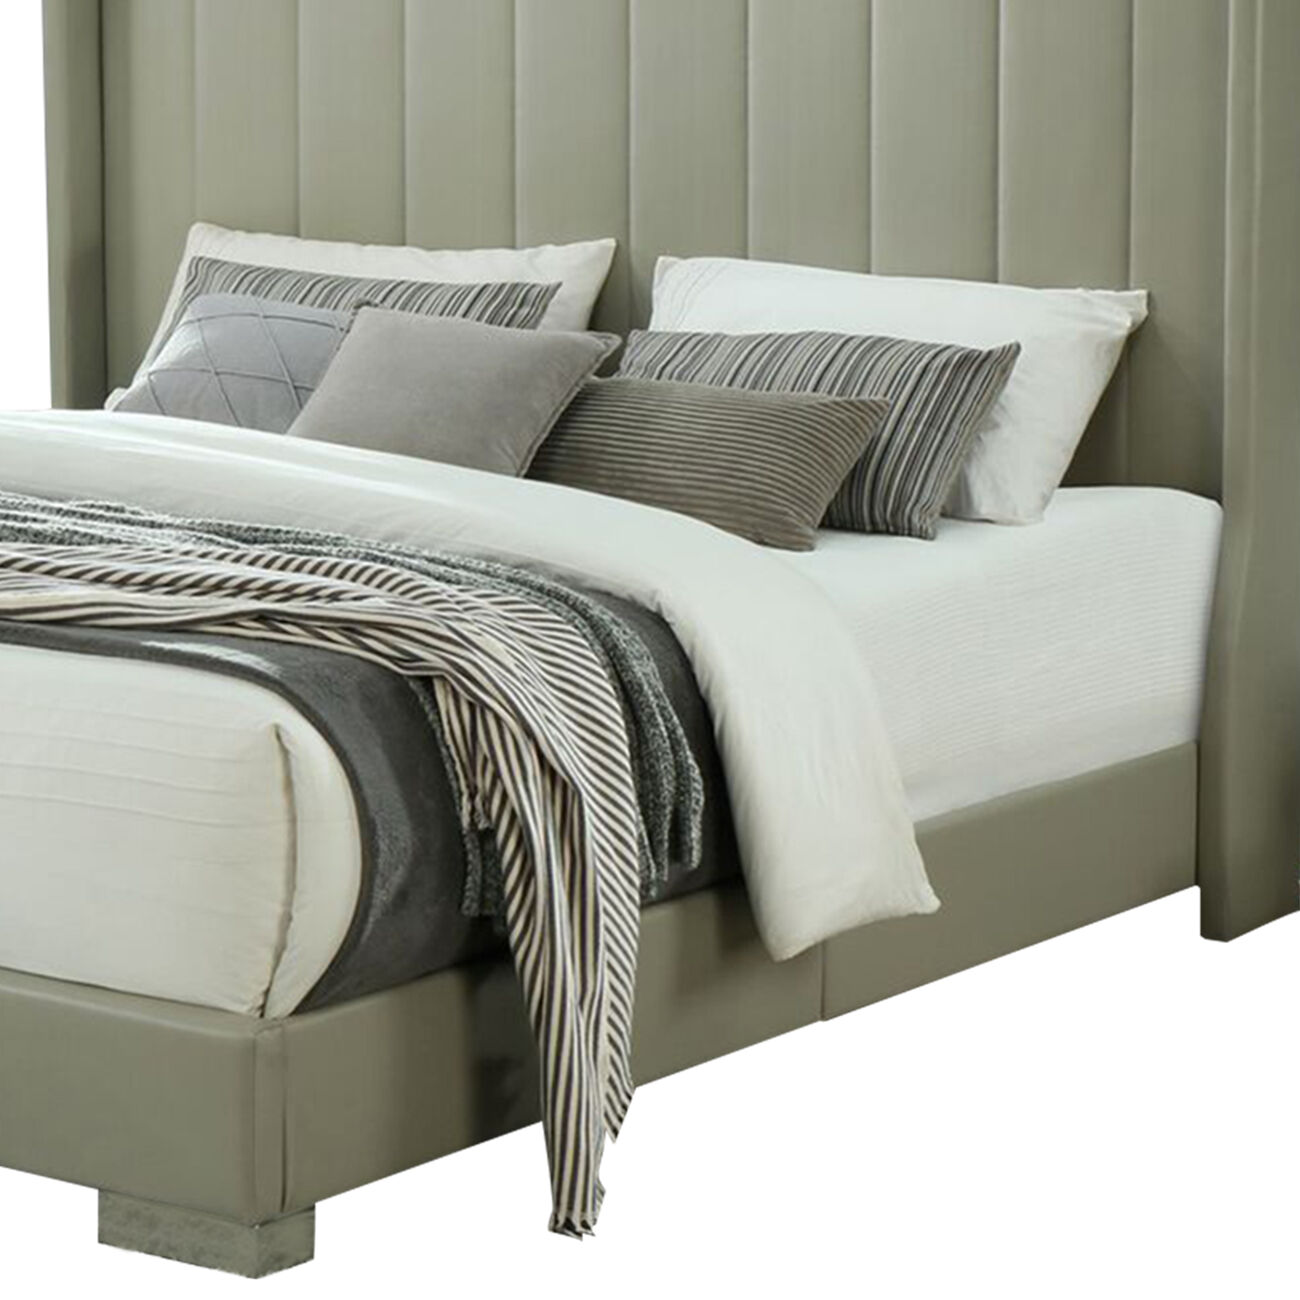 Vertical Stitched Woven Leatherette Wooden Frame Queen Bed, Gray